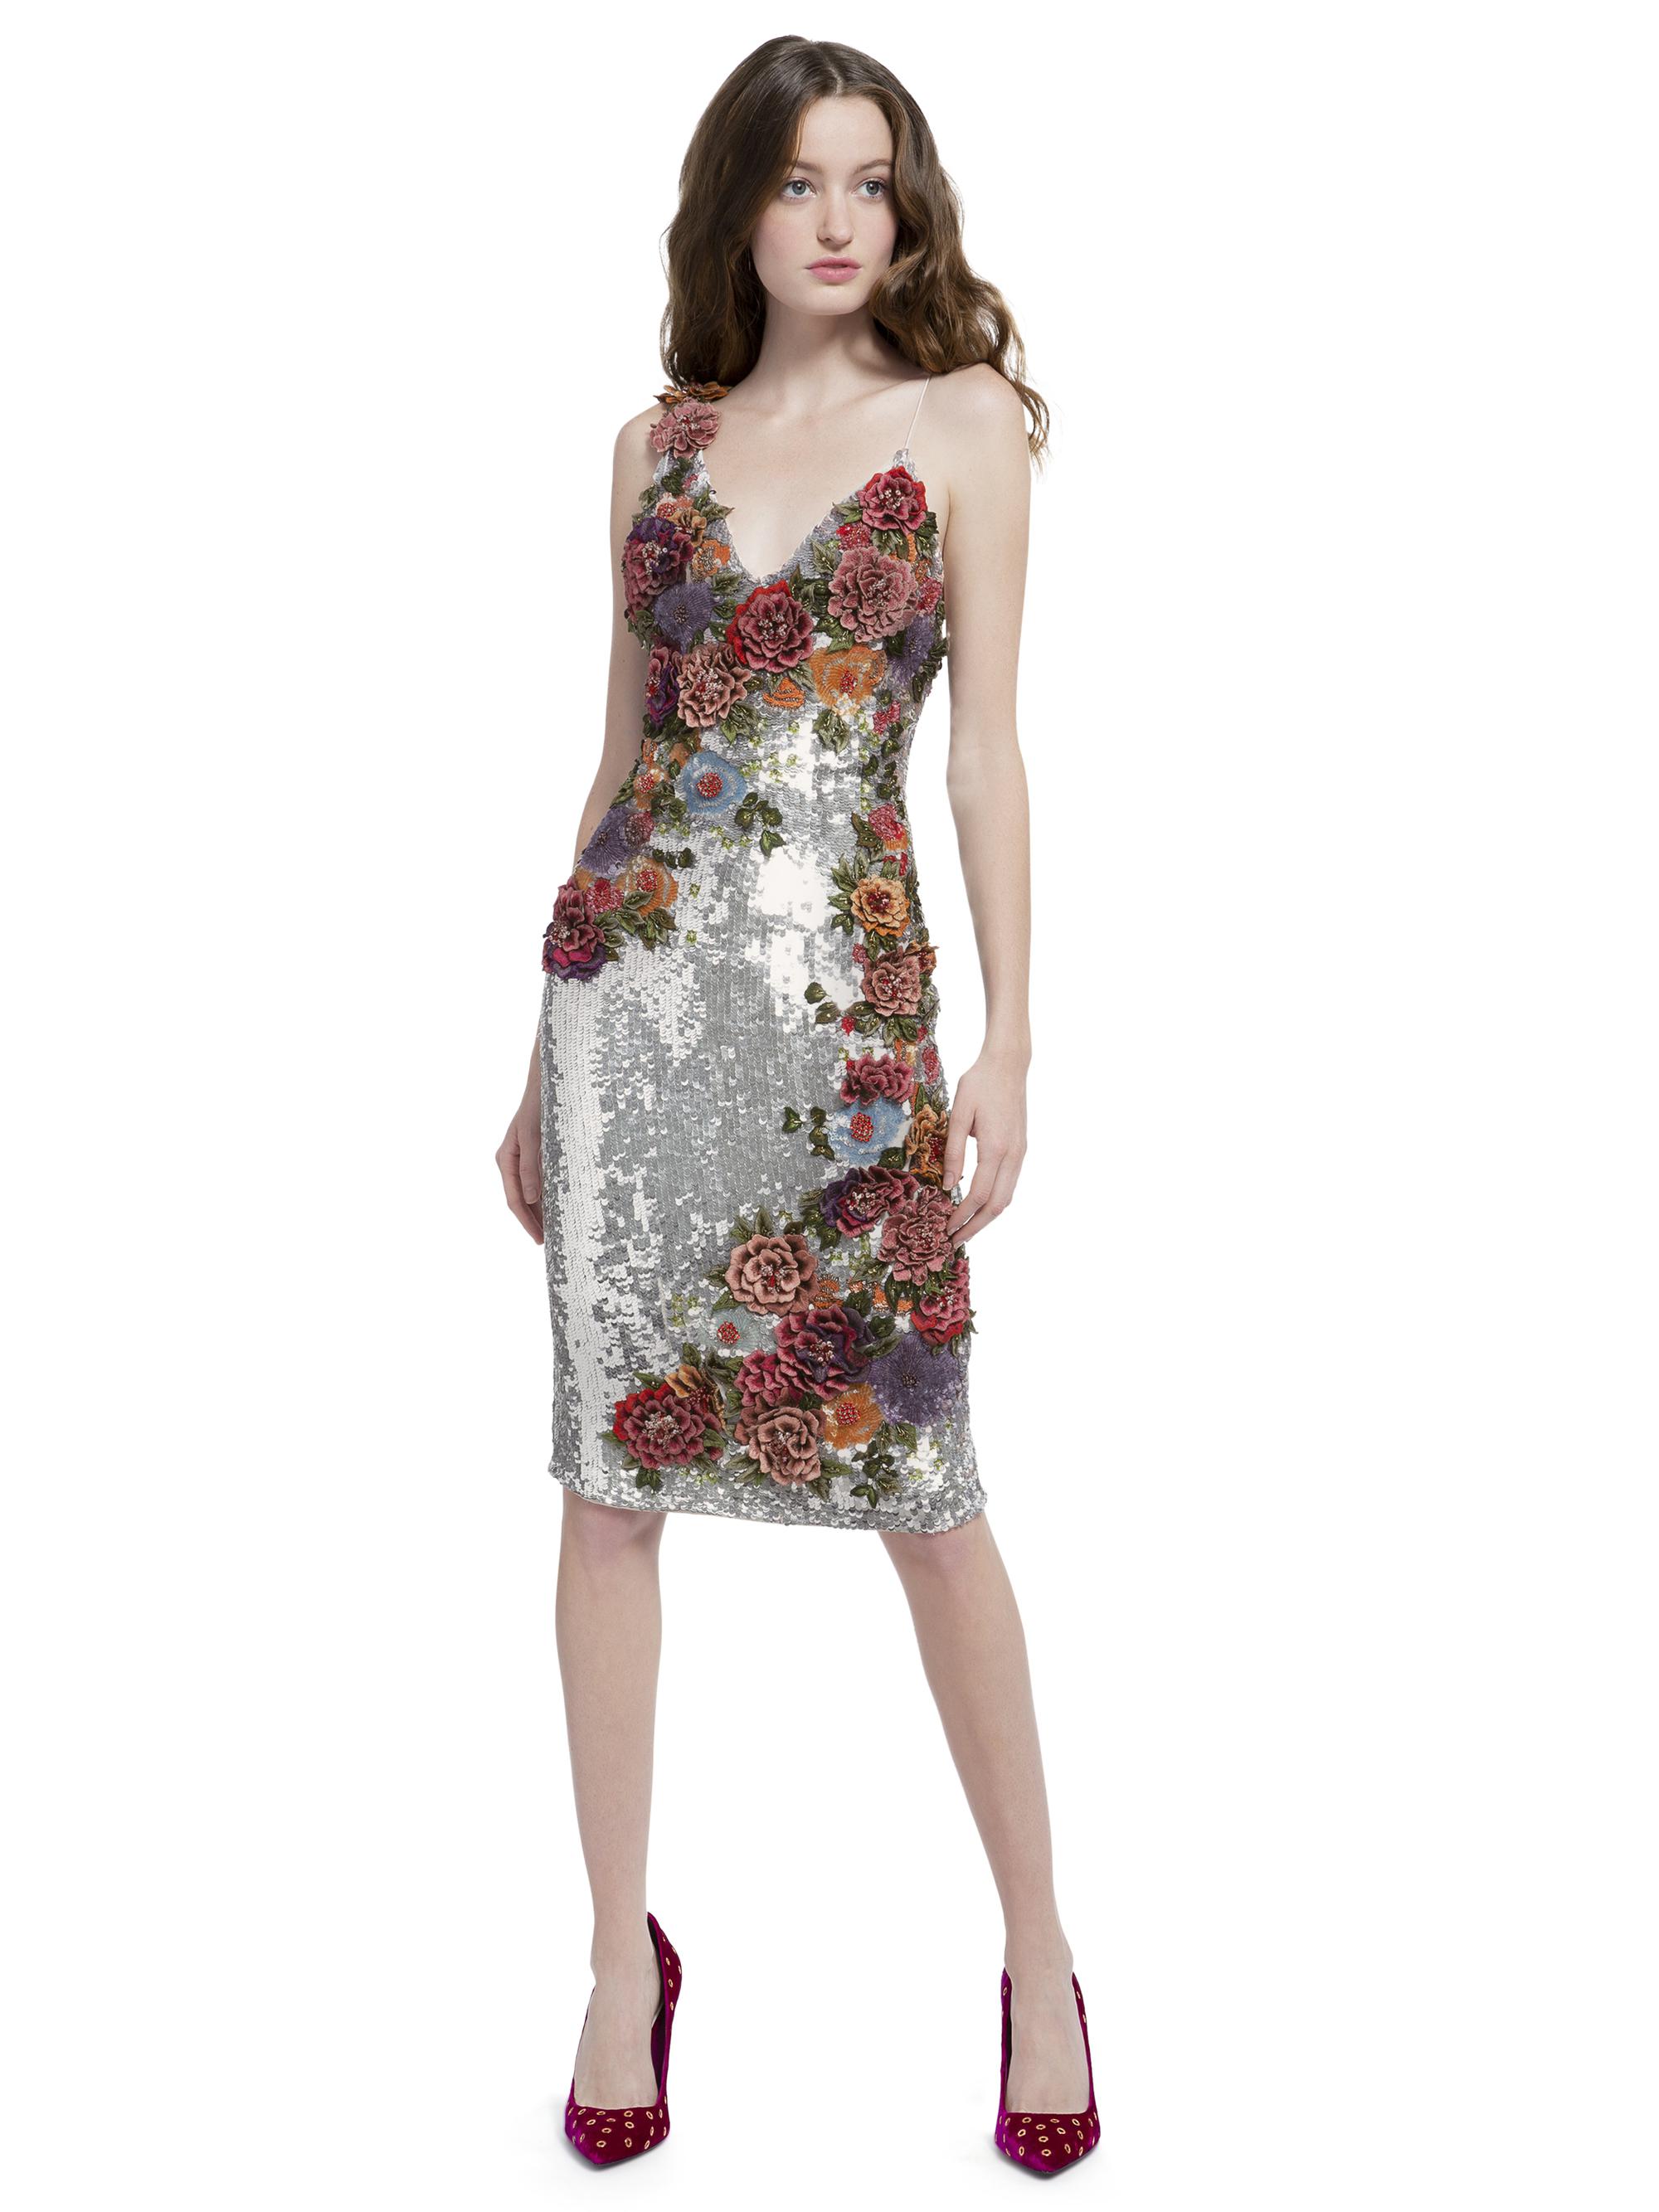 Alice + Olivia Francie Sequin Cocktail Dress in Silver (Metallic) - Lyst